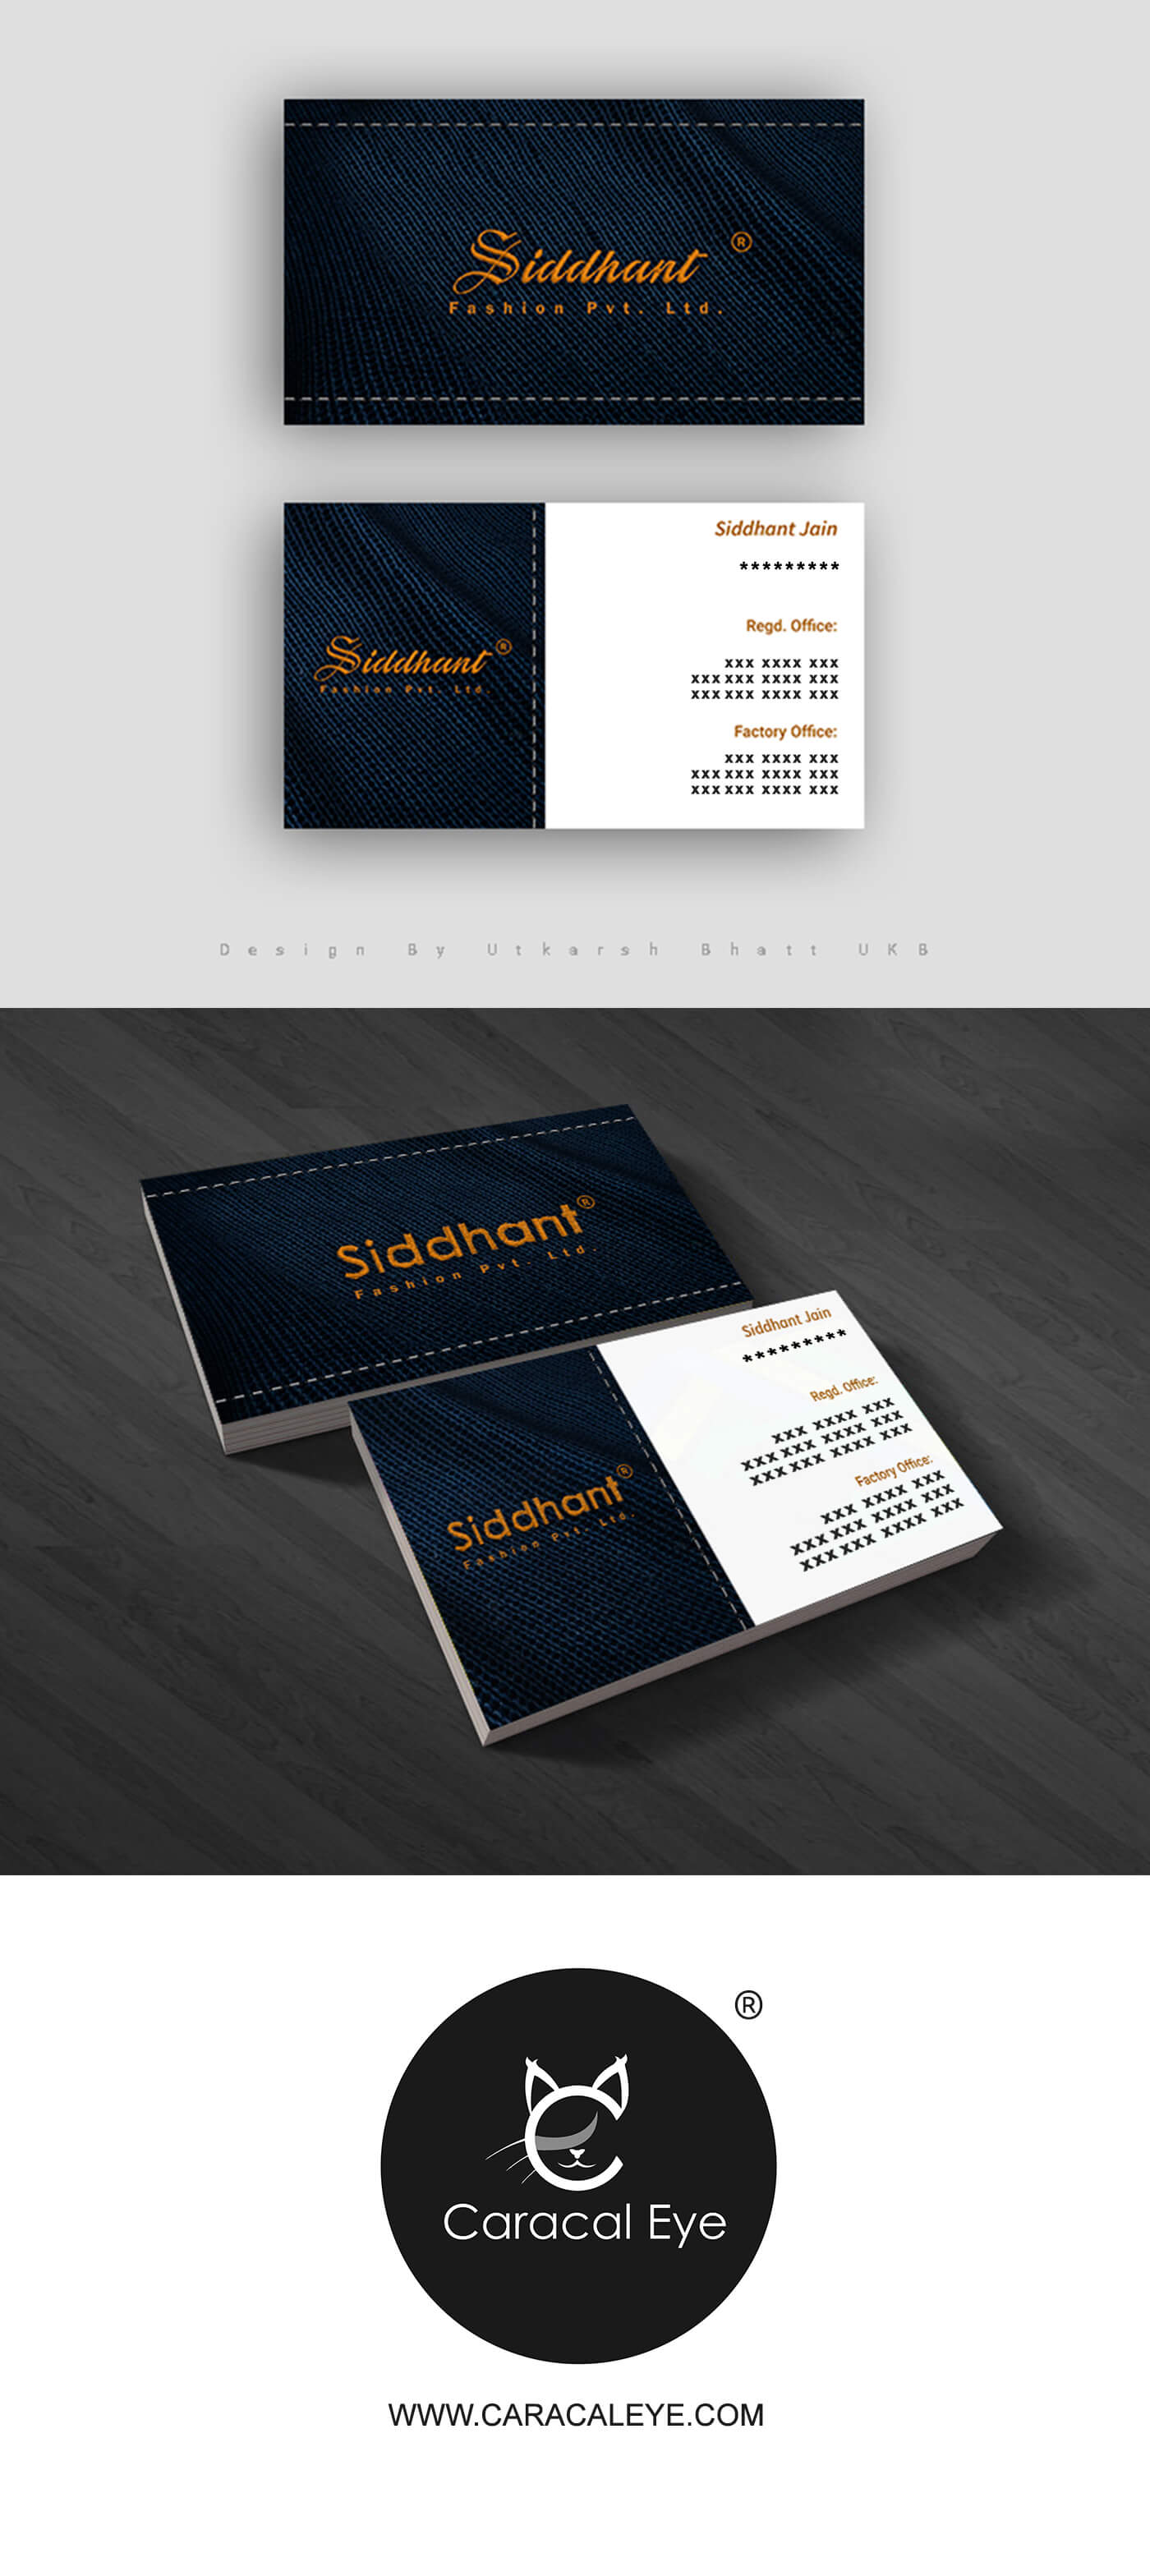 Branding and Visiting Card Design By CaracalEye